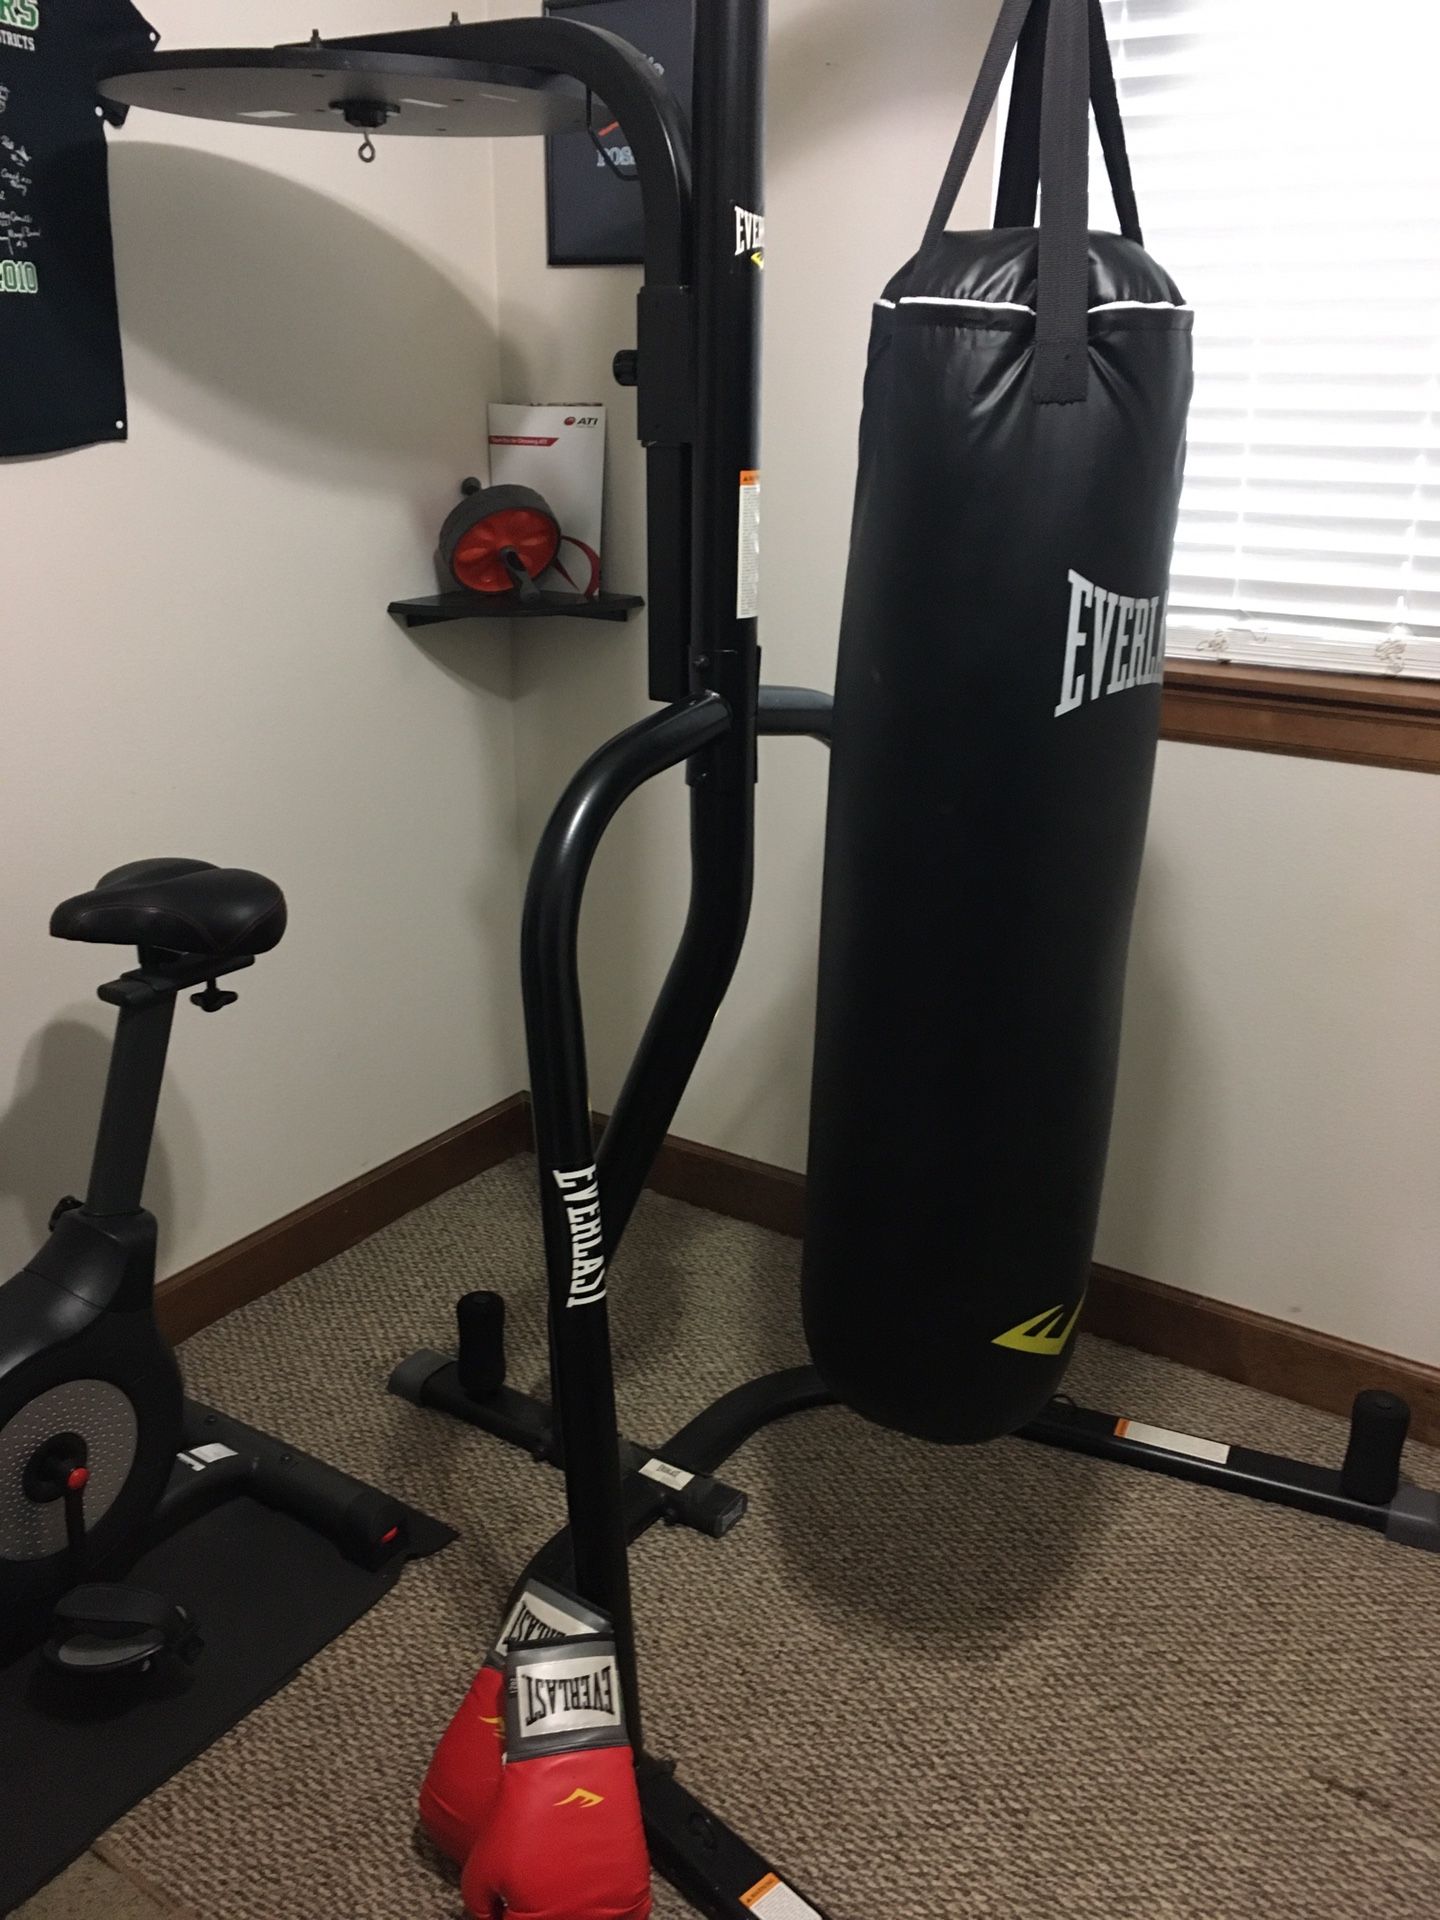 Sale Pending: Everlast Powercore 100lbs Speed/Punch Bag/Stand